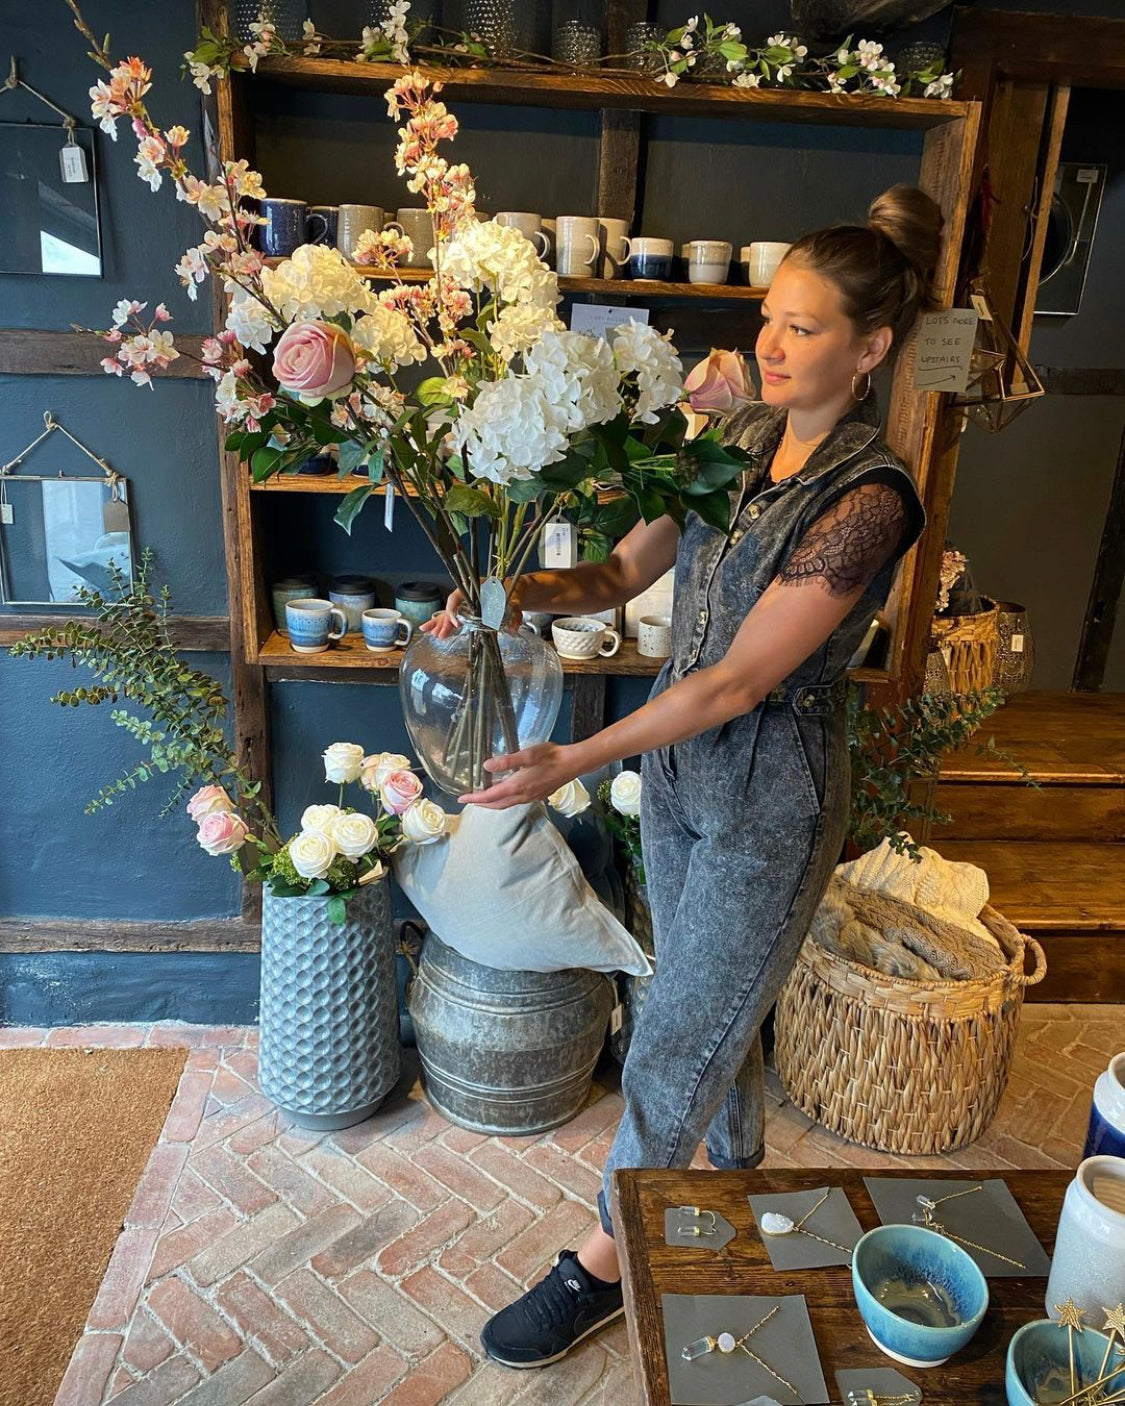 Rose and Co store interior in Godalming. Woman holding large bouquet of fake, artificial flowers in glass vase surrounded by mugs, photo frames, jewellery, baskets and other homeware items